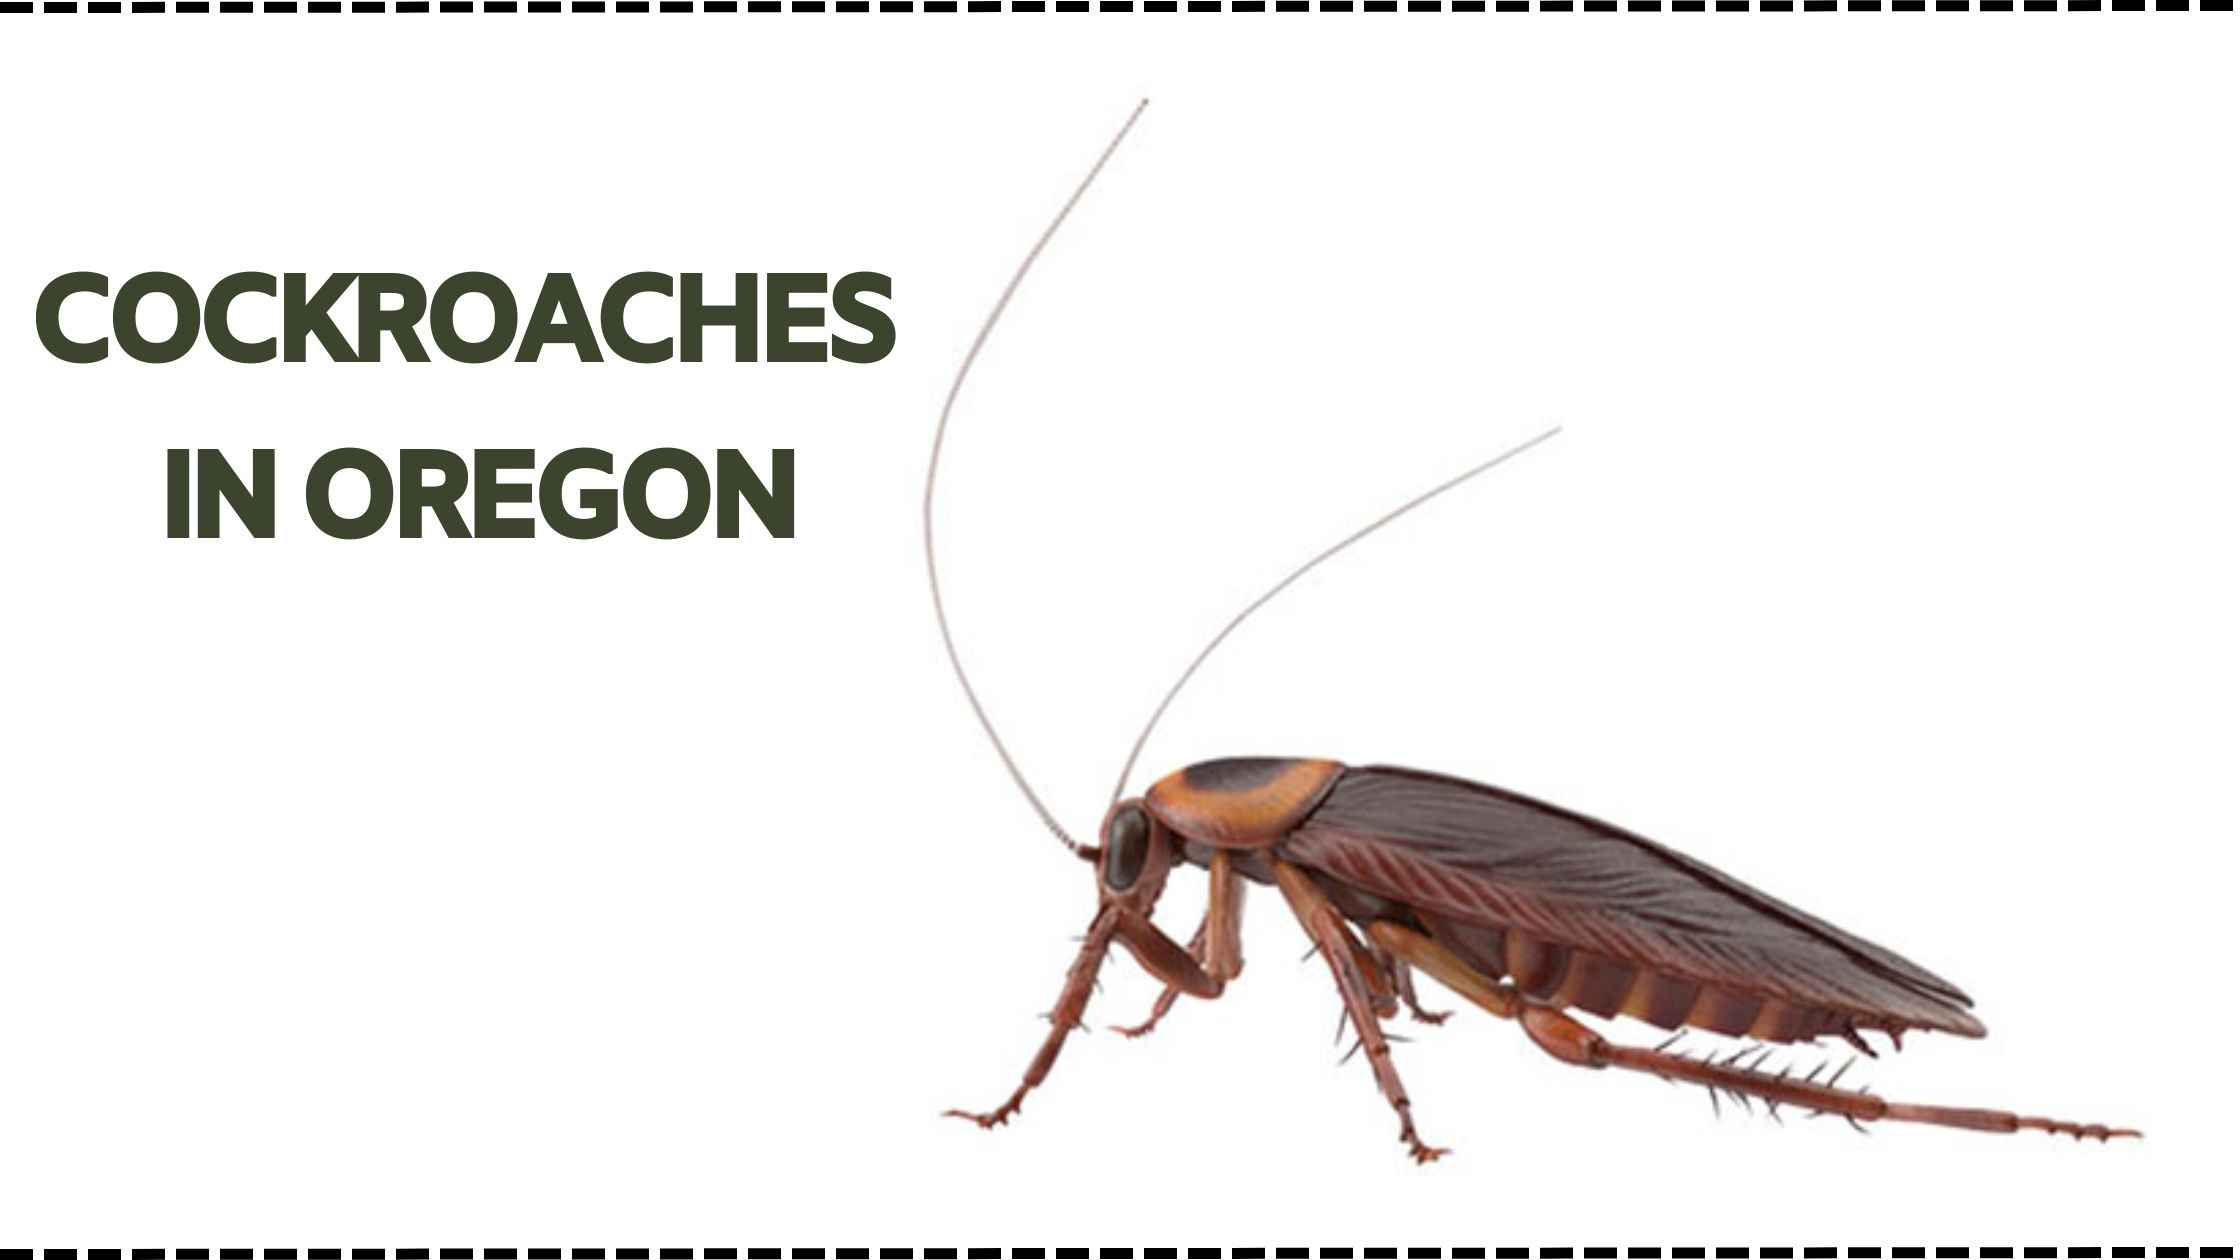 Cockroaches in oregon